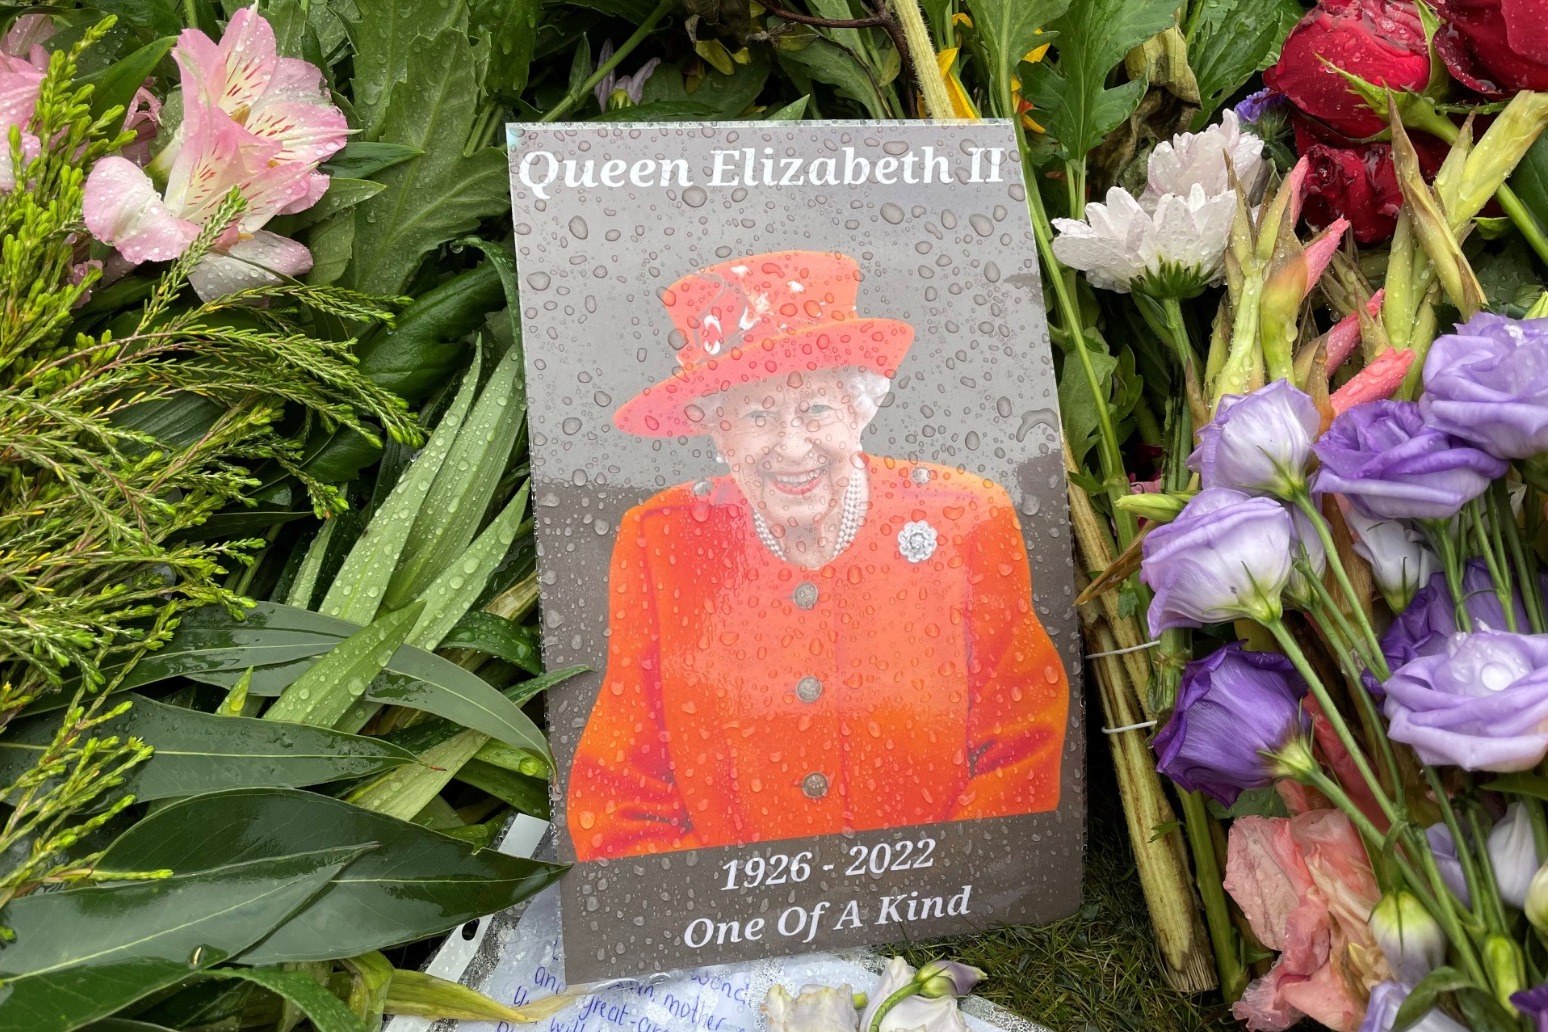 Sandringham tributes to Queen who ‘dedicated her whole life’ continue 